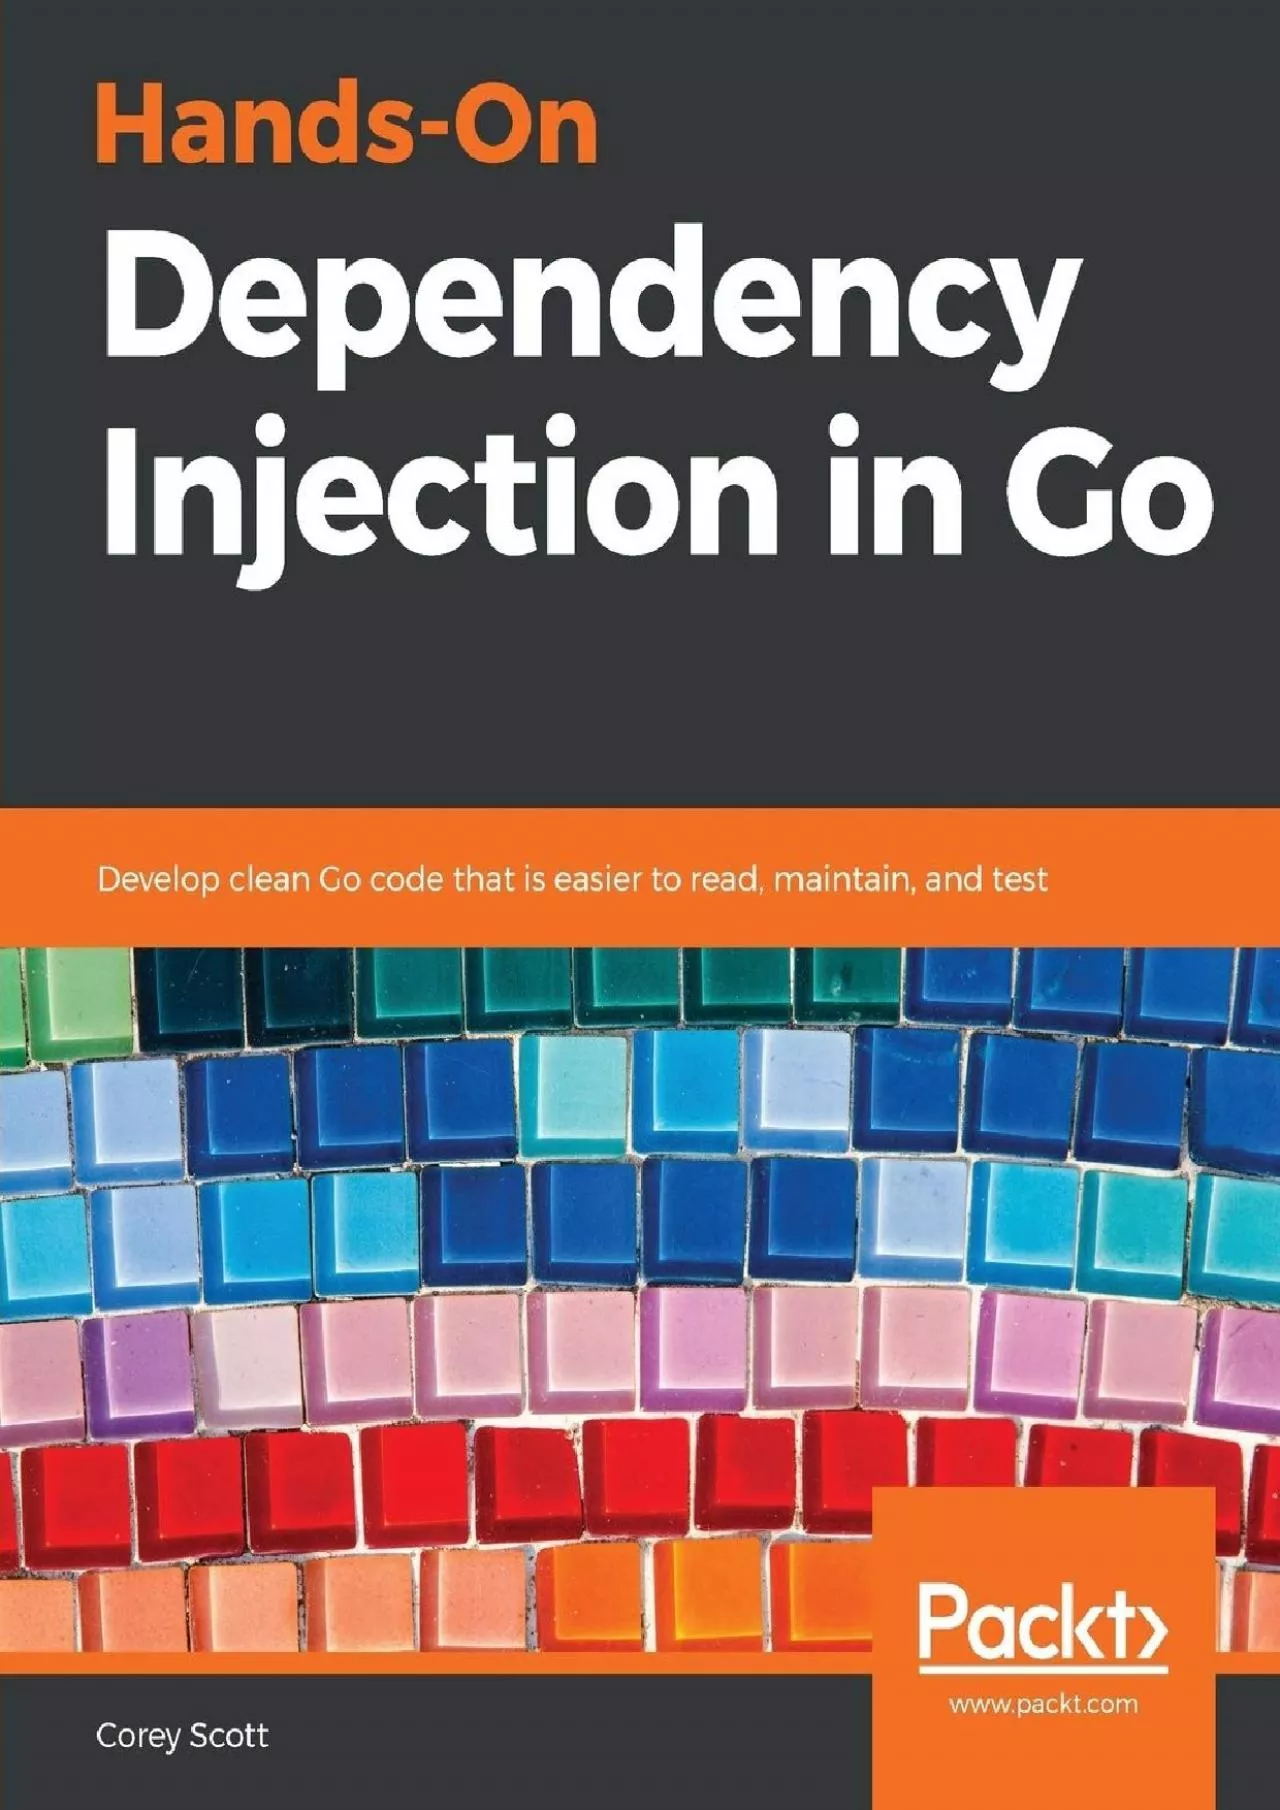 [READING BOOK]-Hands-On Dependency Injection in Go: Develop clean Go code that is easier